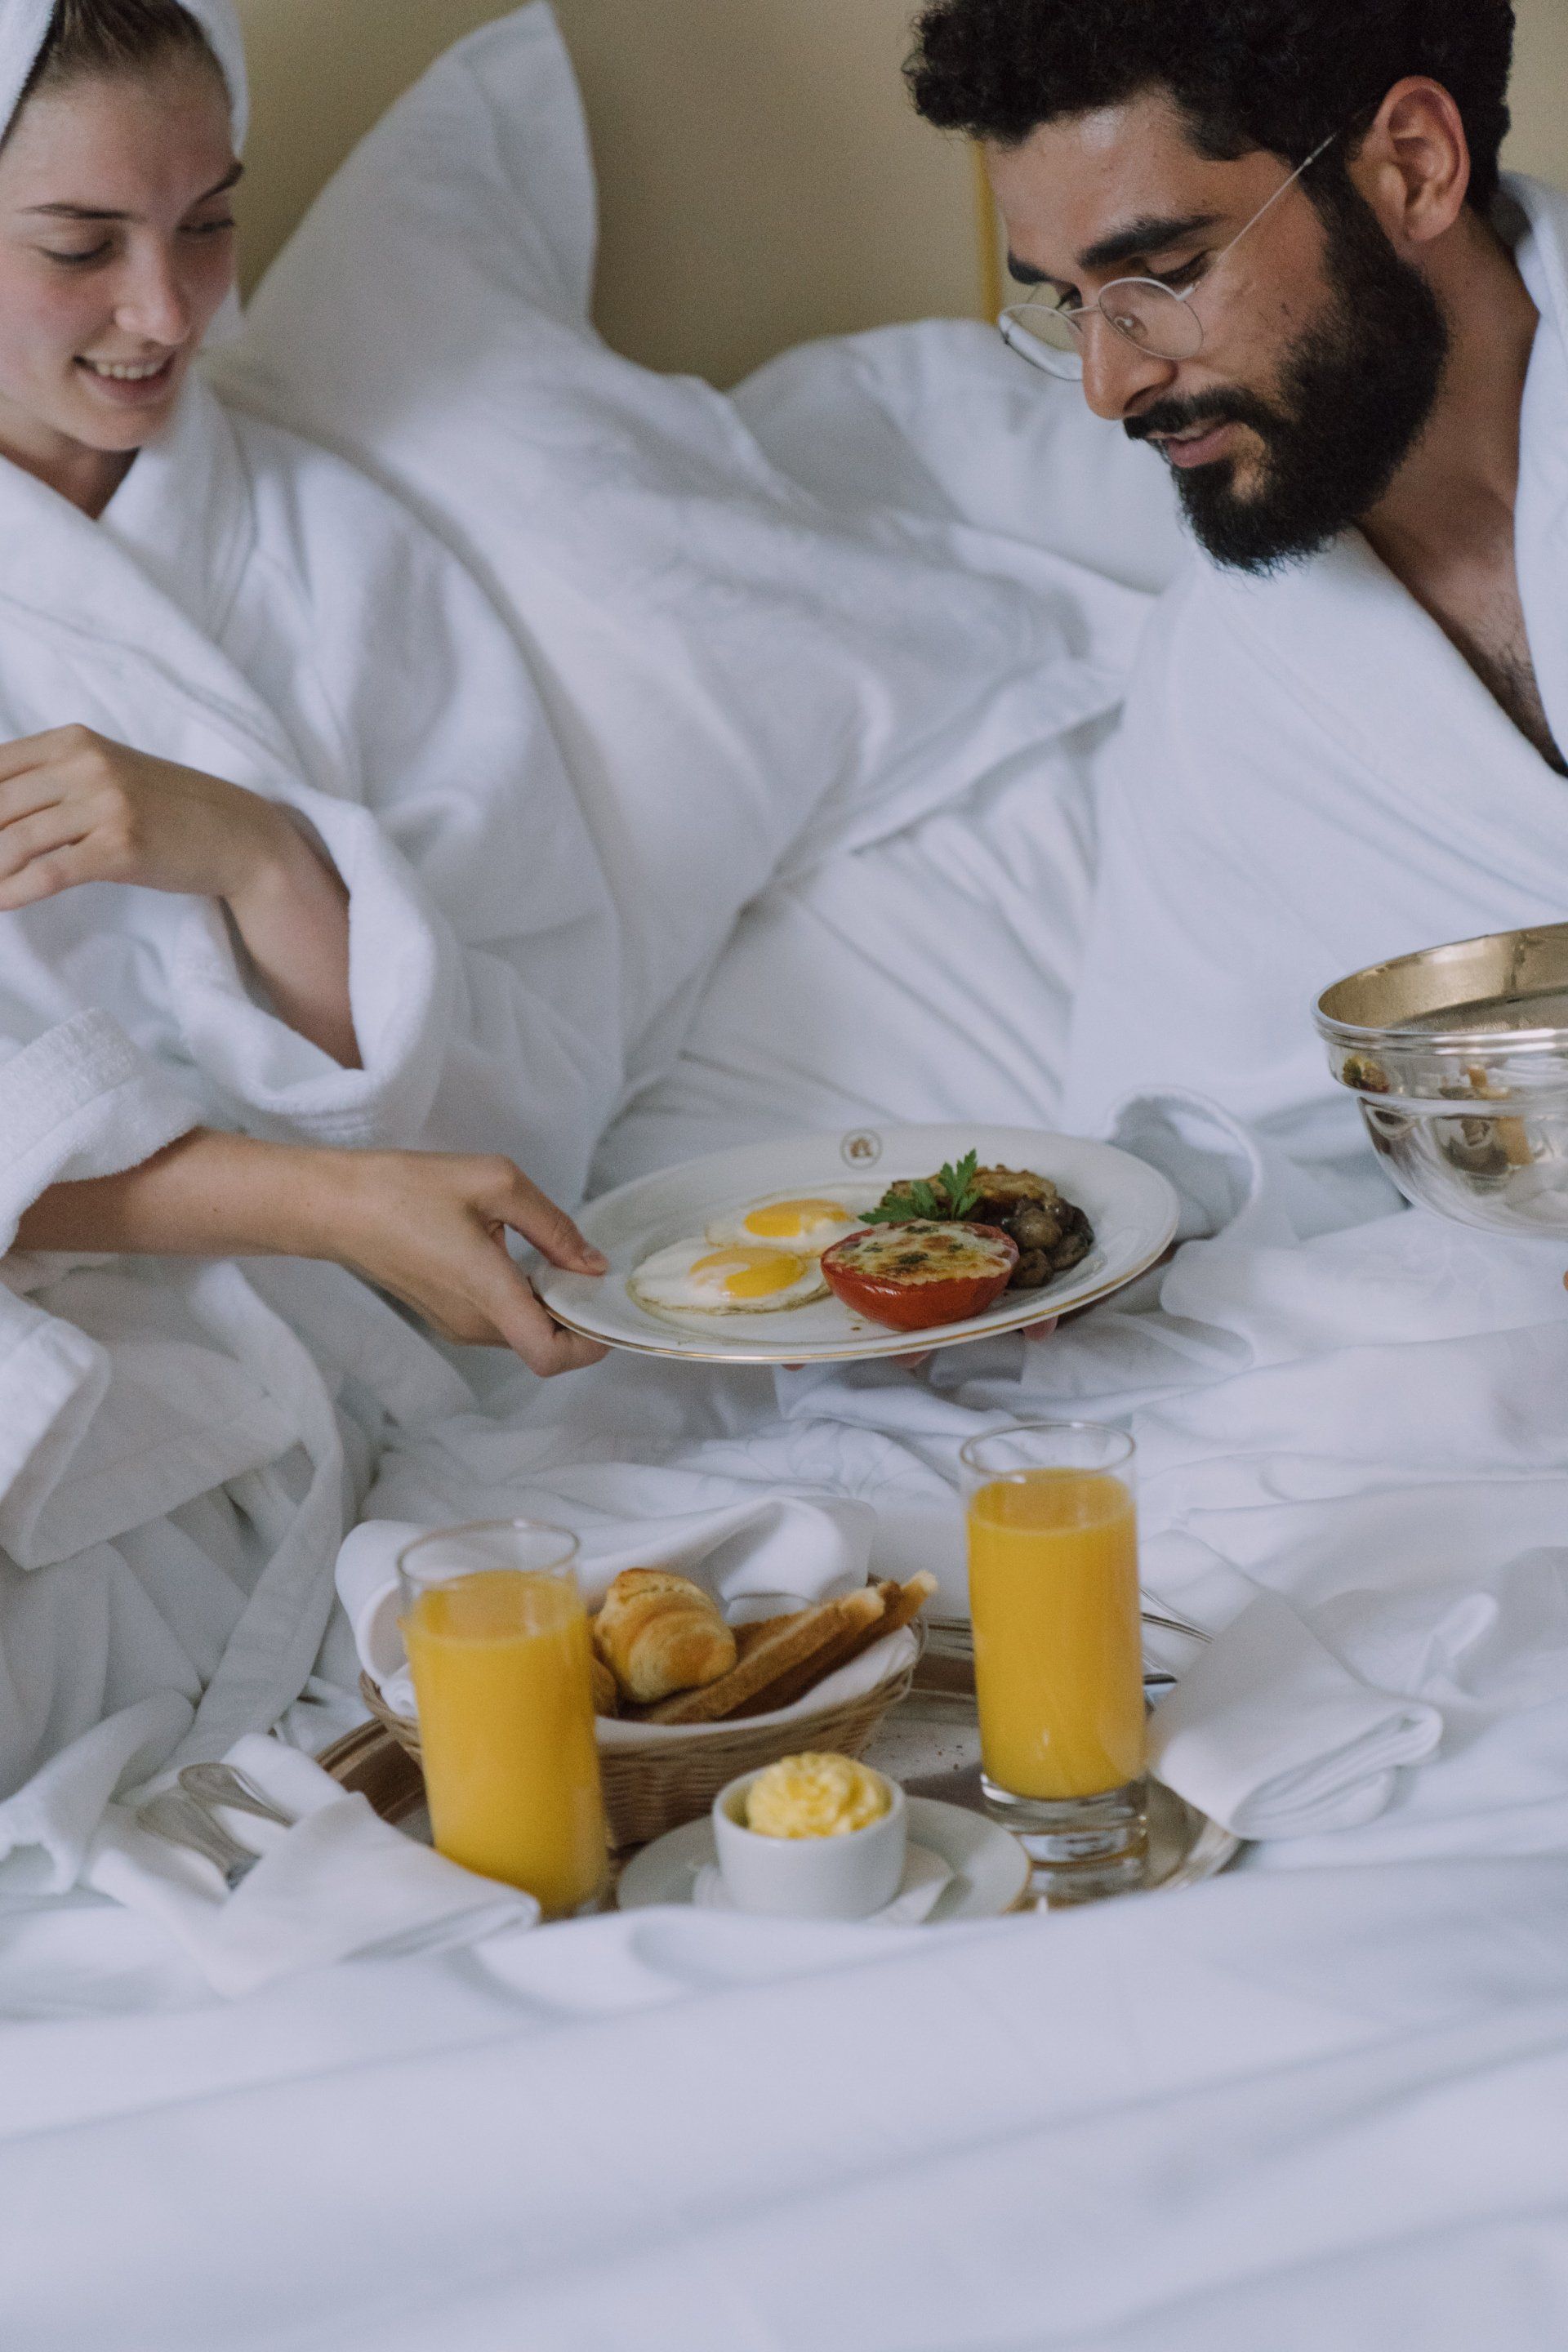 A man and a woman are laying in bed with a tray of food.